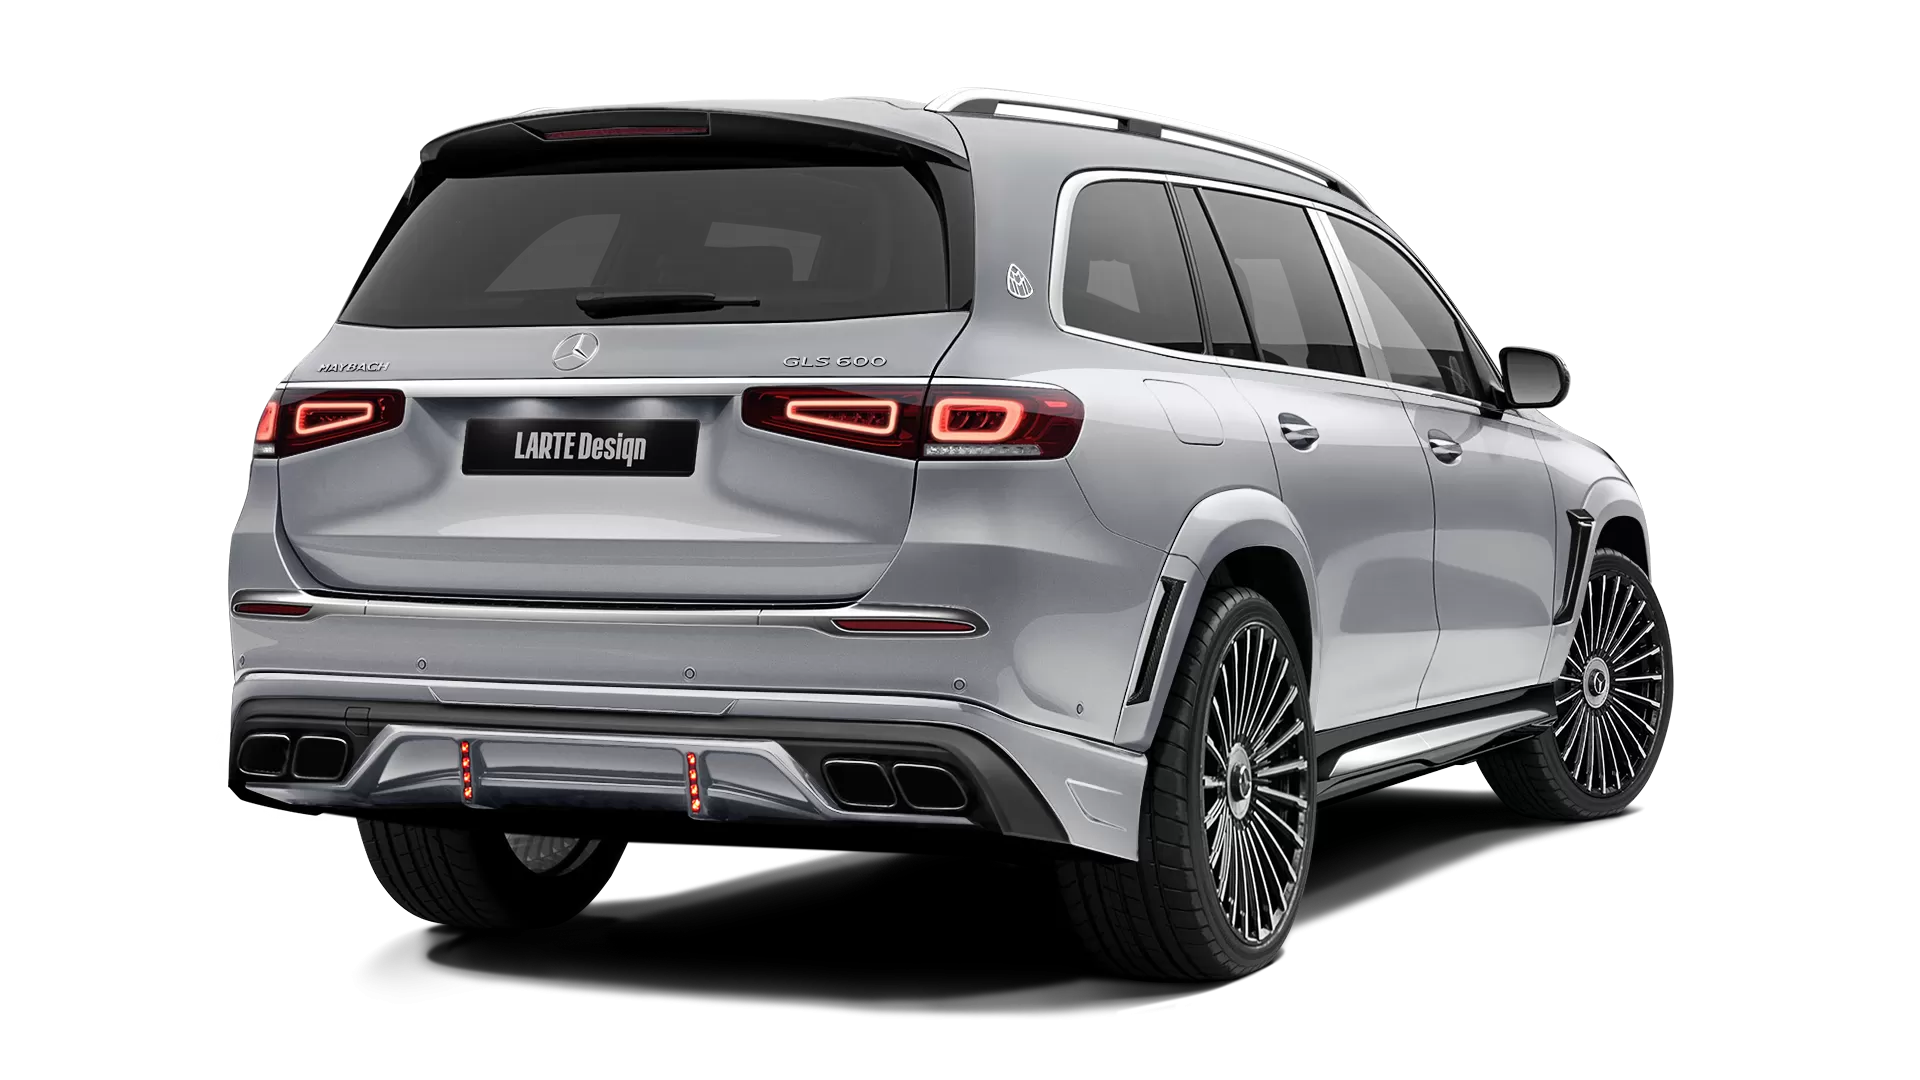 Mercedes Maybach GLS 600 with painted body kit: rear view shown in High Tech Silver & Selenite Grey